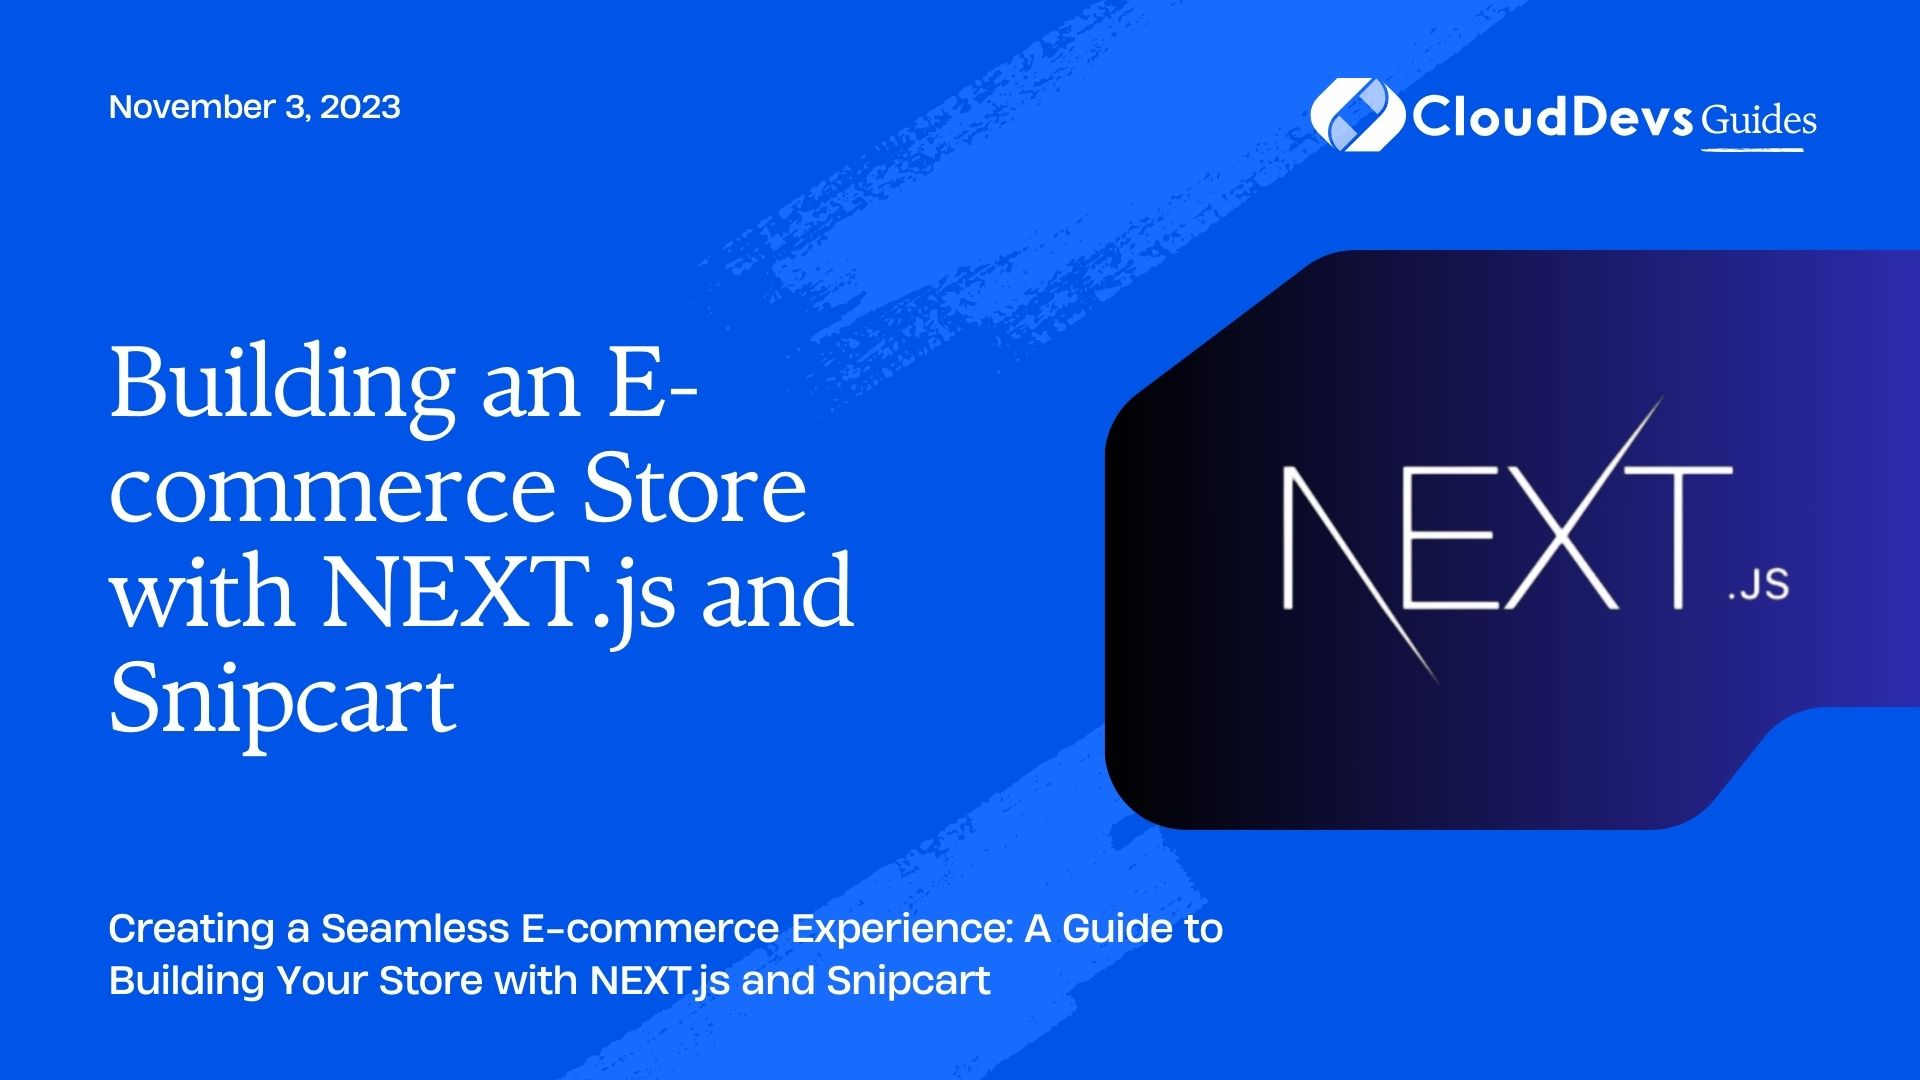 Building an E-commerce Store with NEXT.js and Snipcart